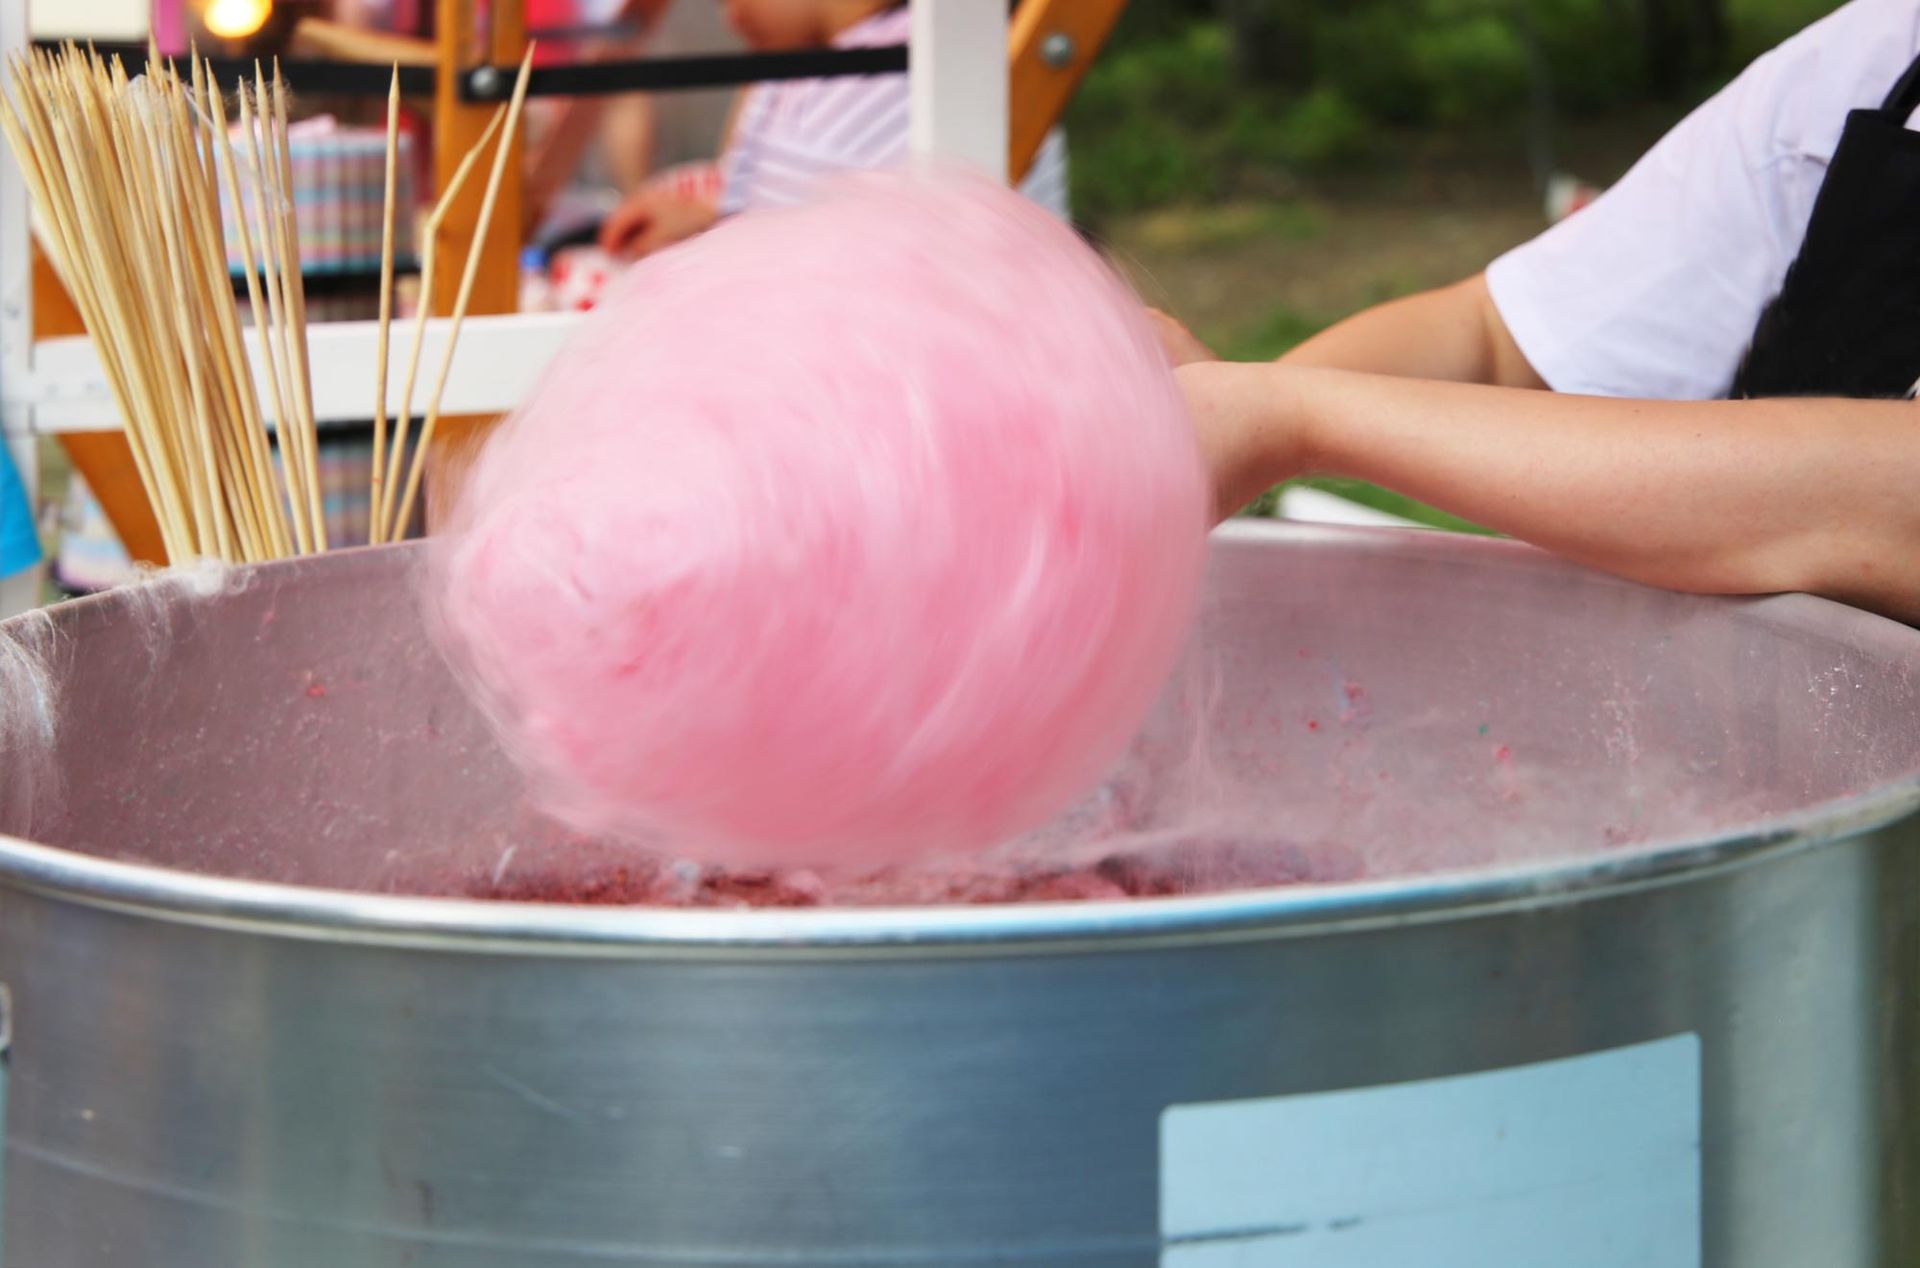 A person is making pink cotton candy in a large metal bowl.